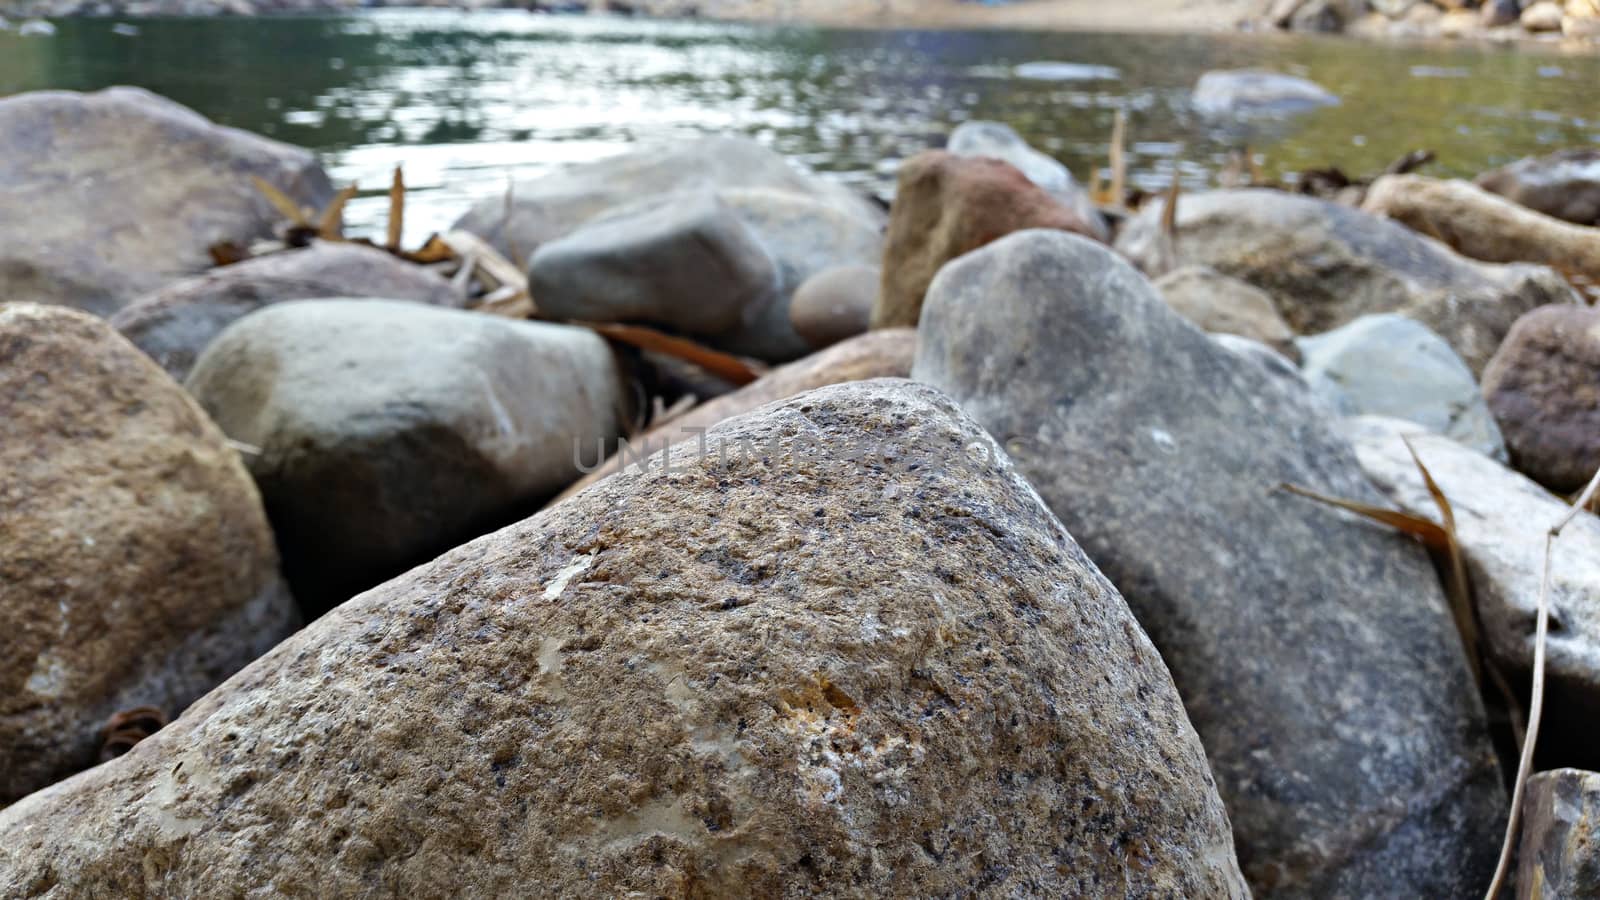 The stones around the lake and some of dry dropped leave